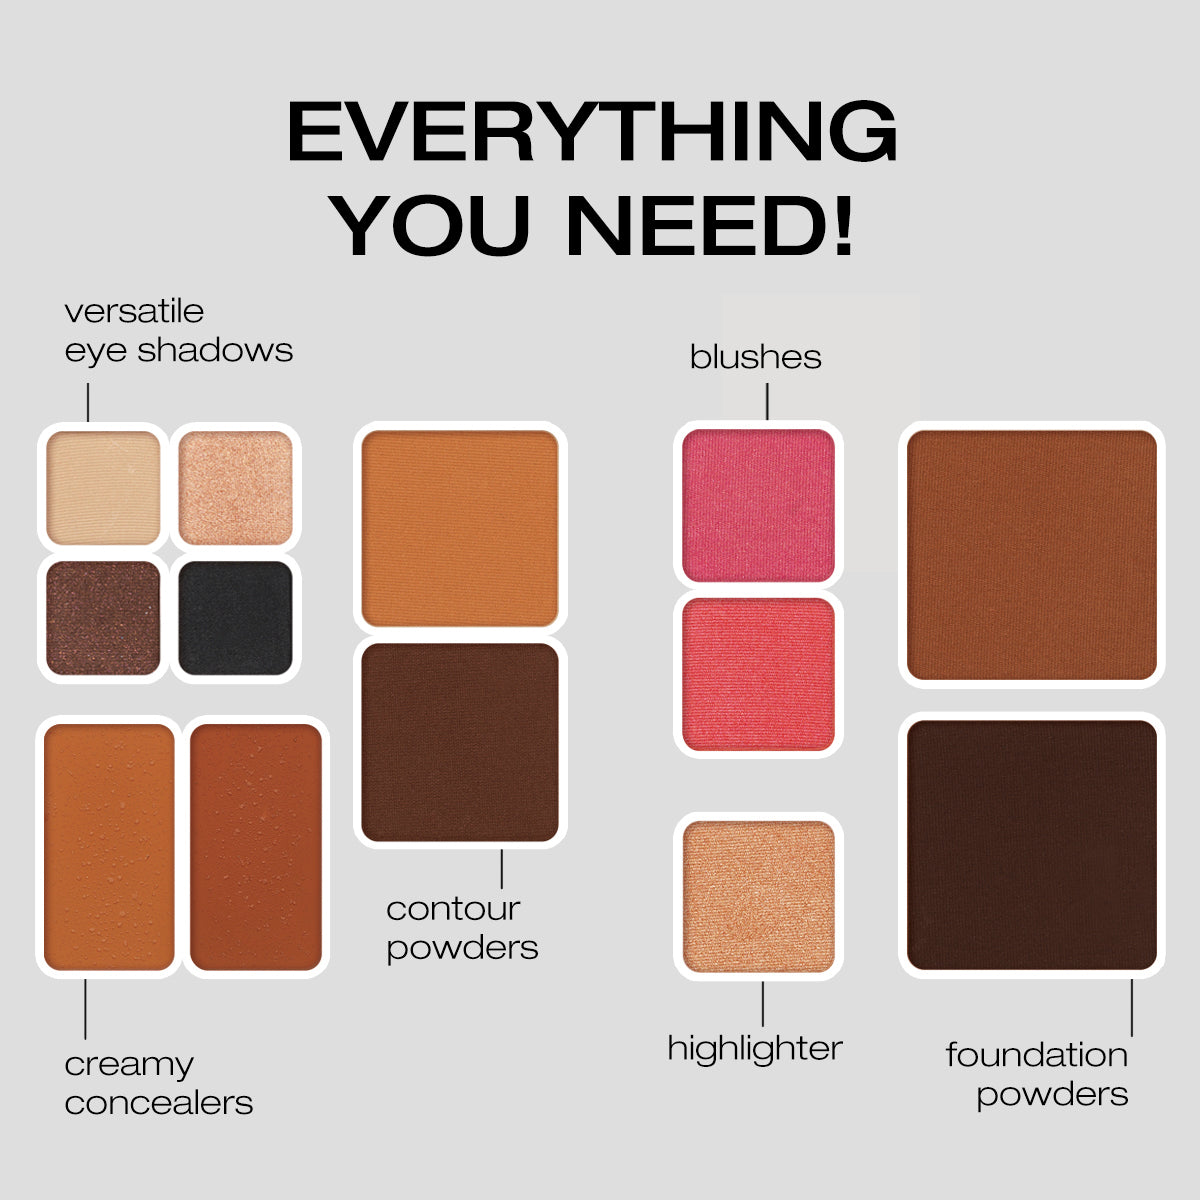 Everything you need: Versatile eye shadows, creamy concealers, contour powders, blushes, highlighter, foundation powders